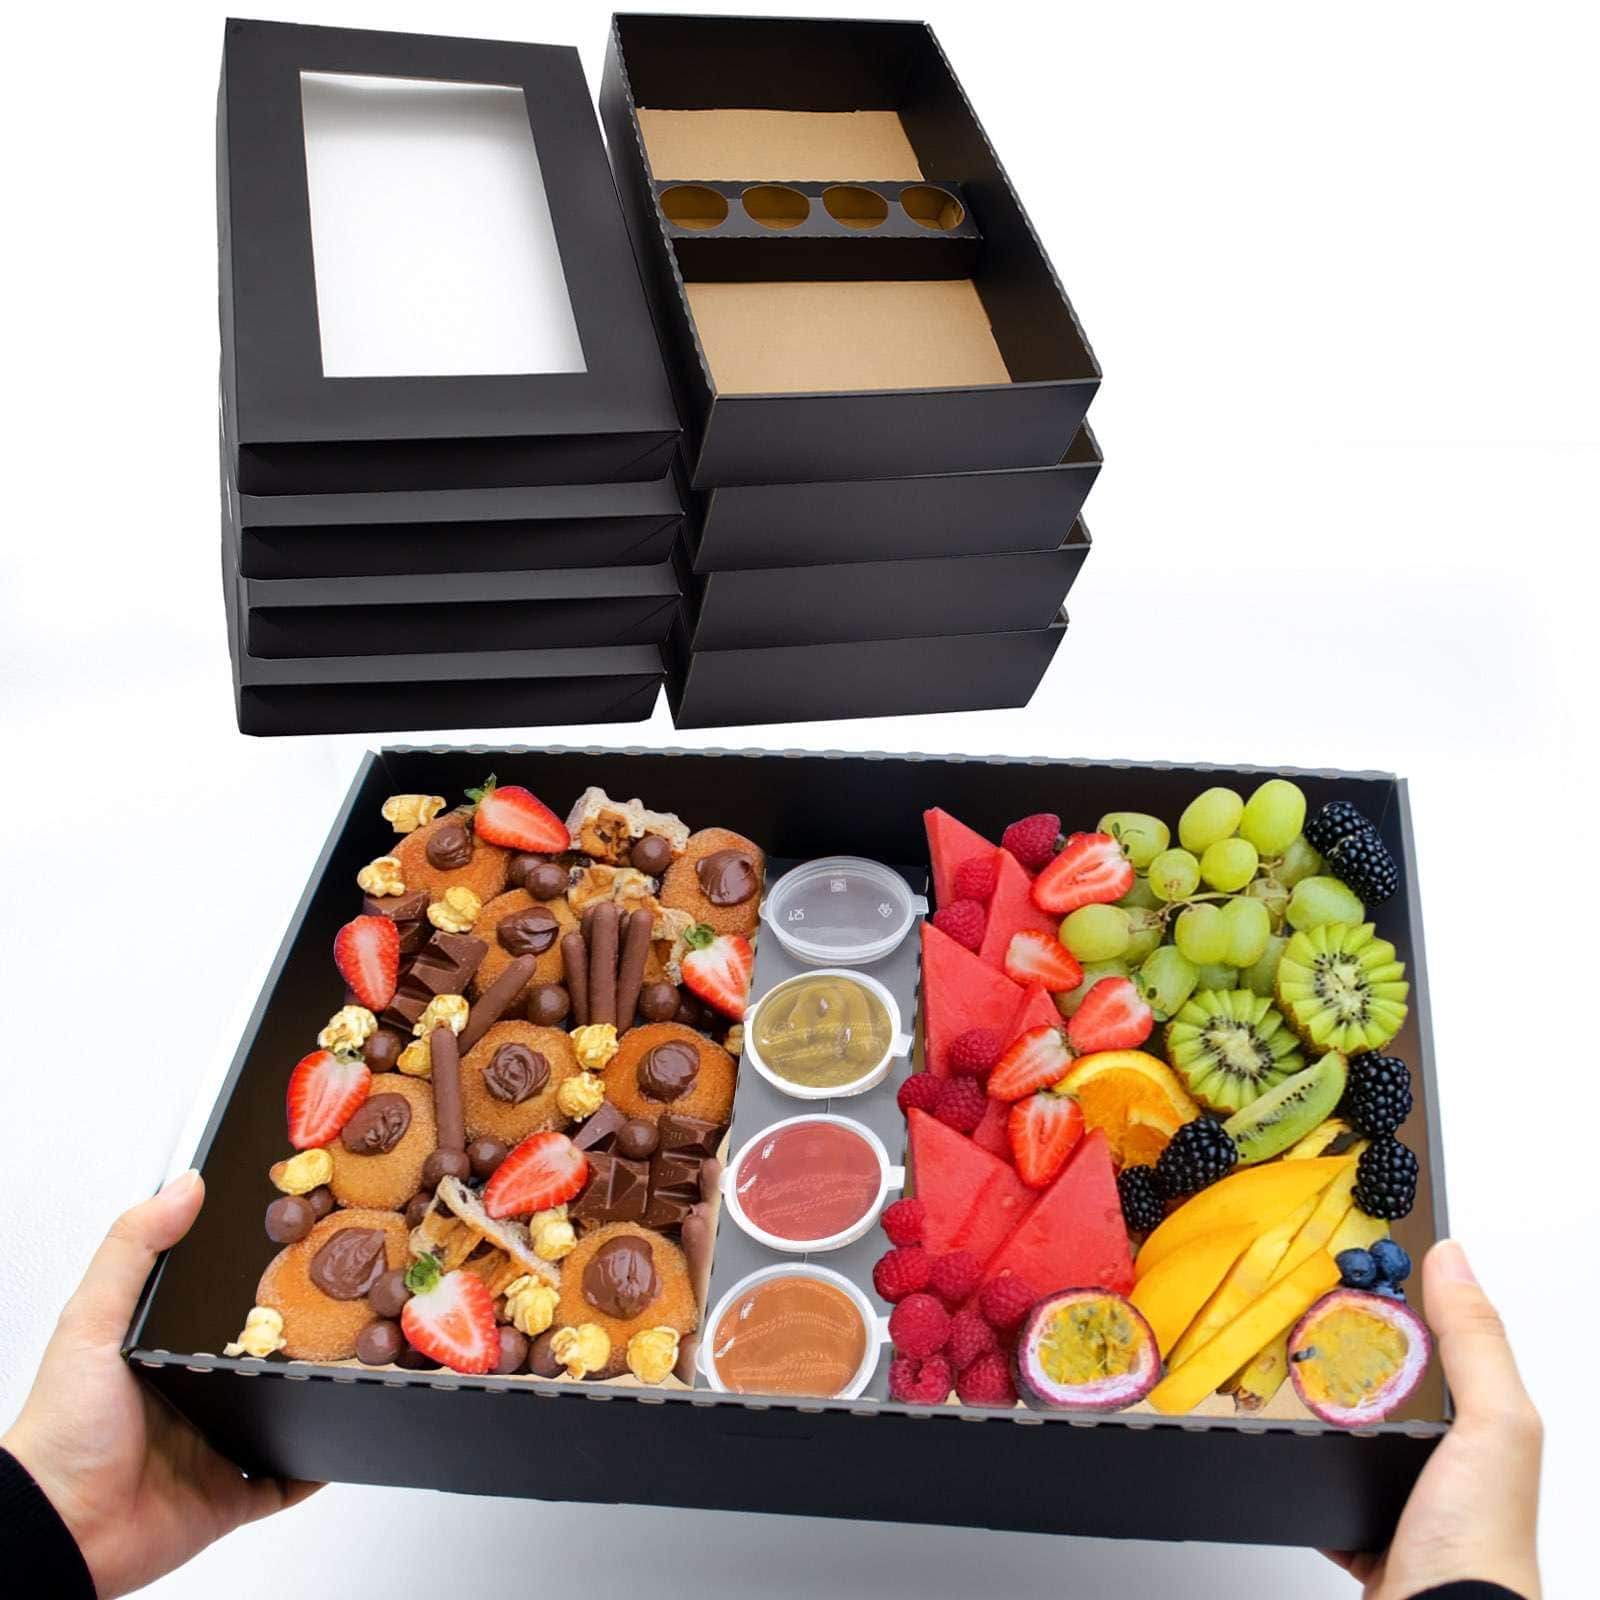 Wholesale Custom Snack Platter Box Packaging BoxCandy Nut Box Dinner Picnic Gifting Baby Party